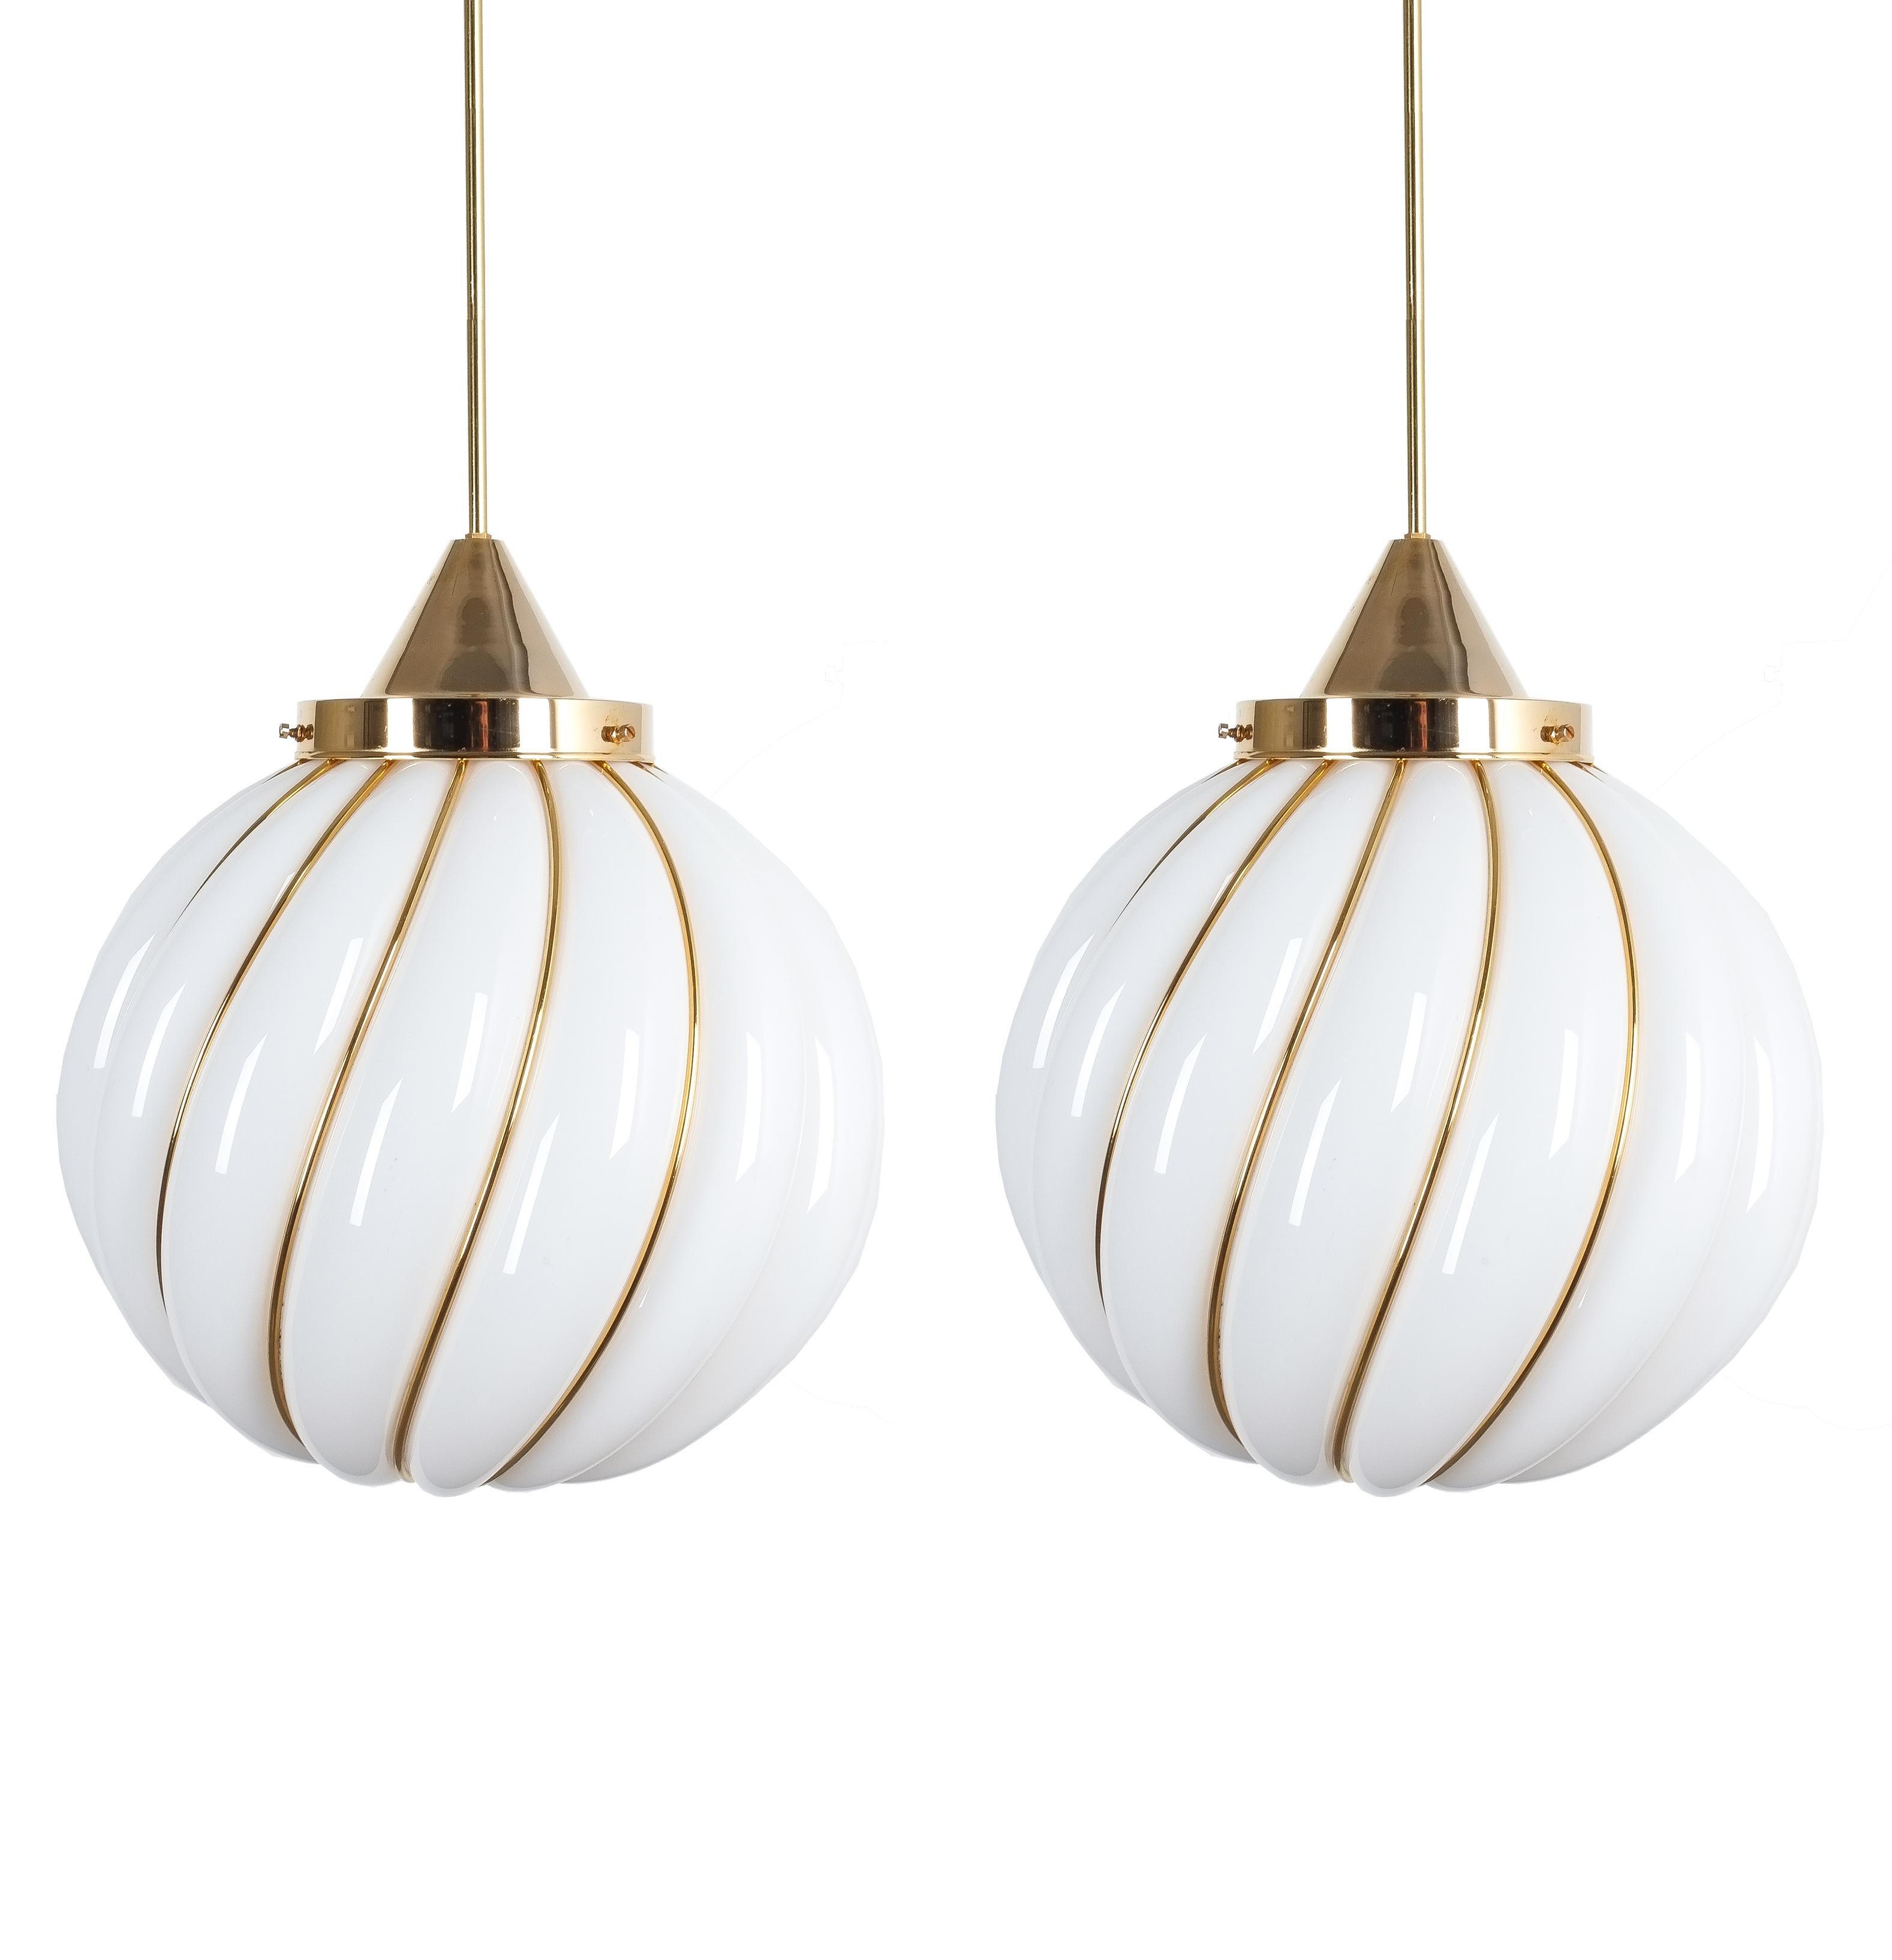 Pair of Adolf Loos Pendant Lamps For Veart Opal Glass Gold, circa 1960